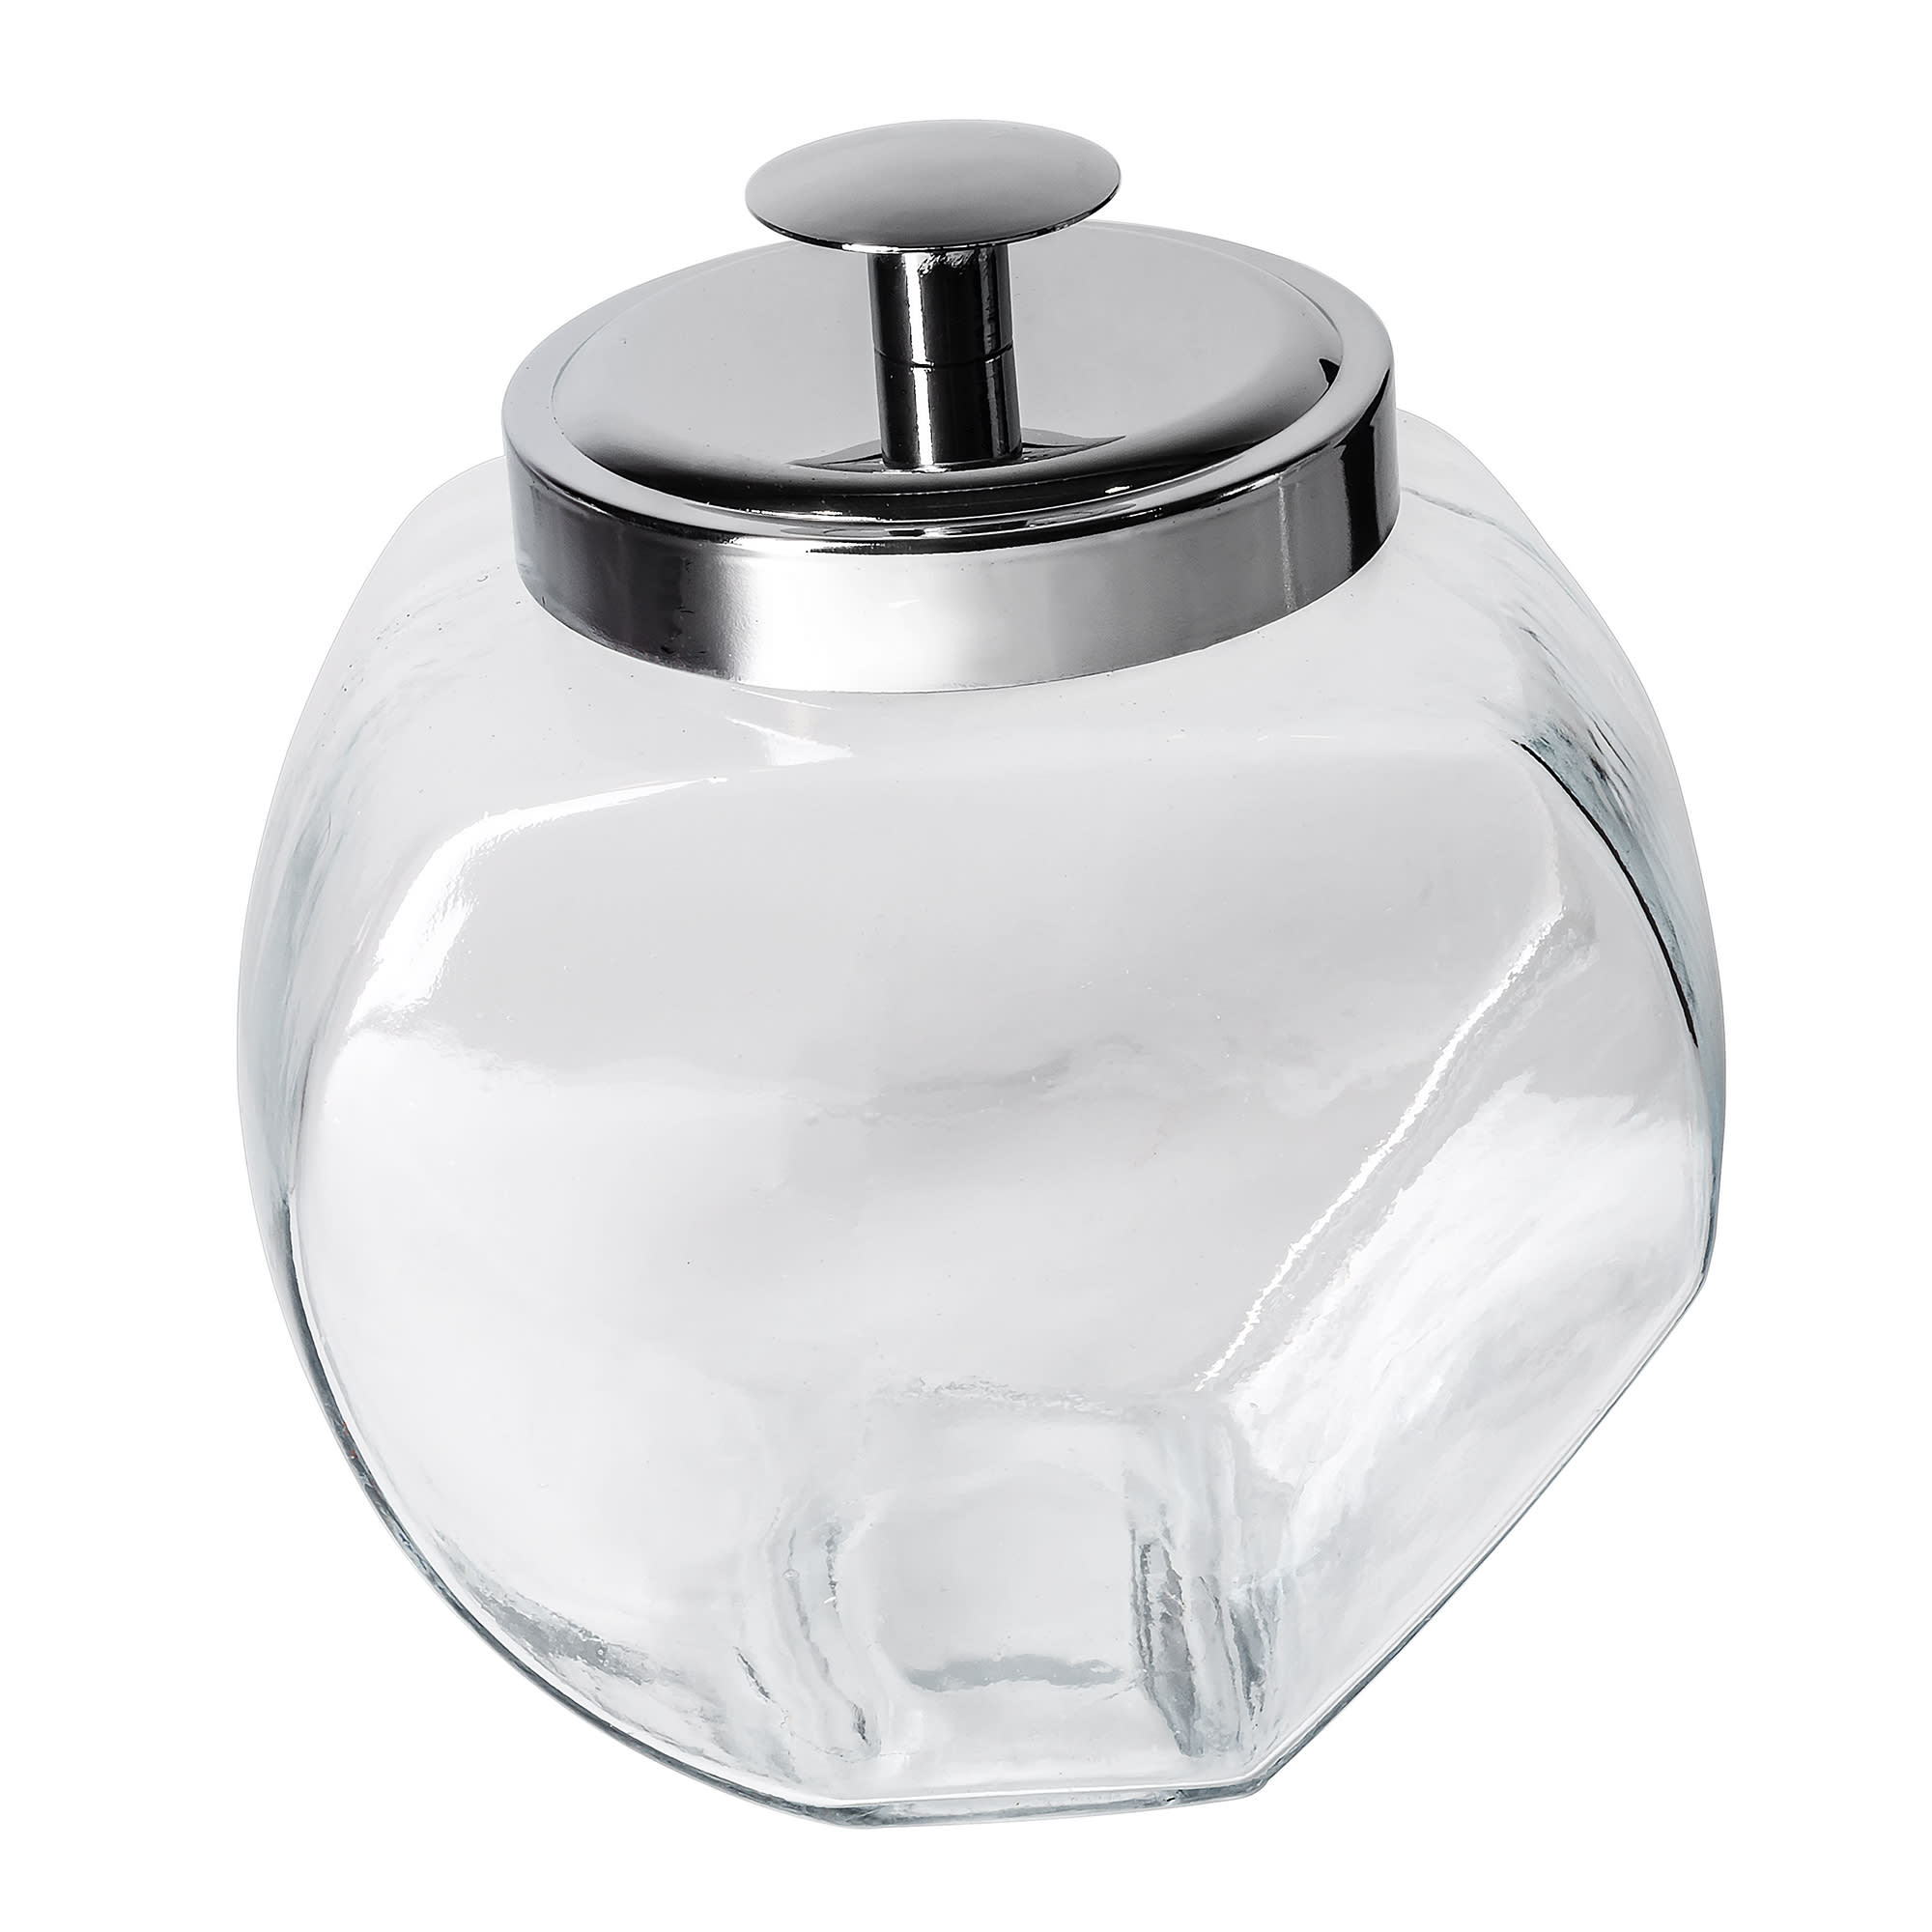 HyperSpace Small Glass Penny Jar, Candy Jar with Chrome Lid, 39oz